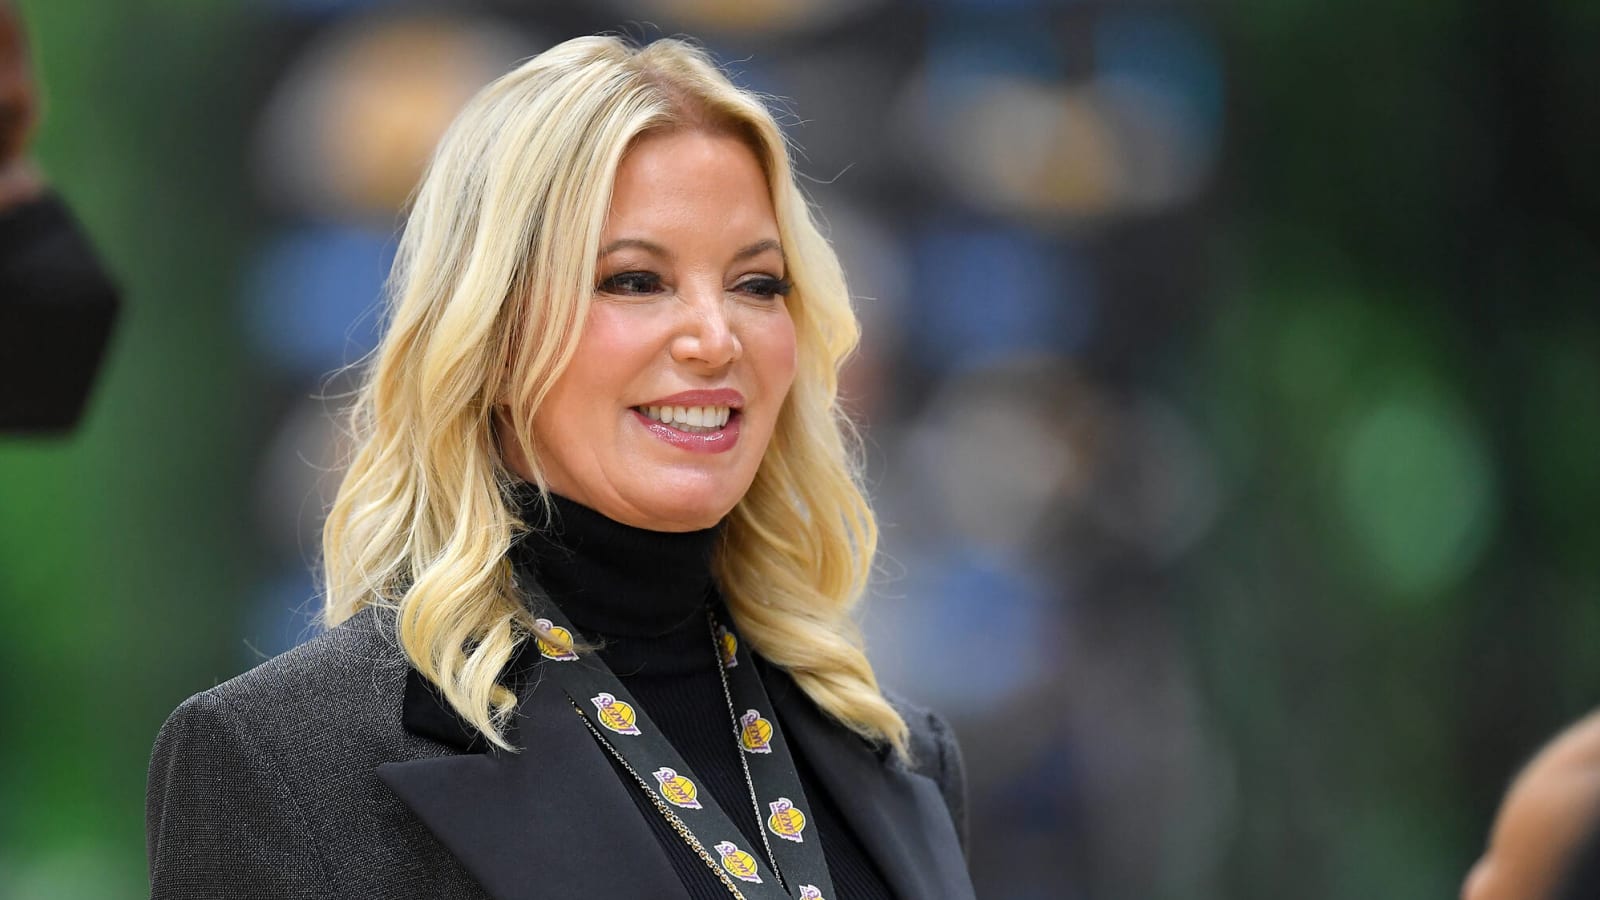 Jeanie Buss: Life, Career & Facts